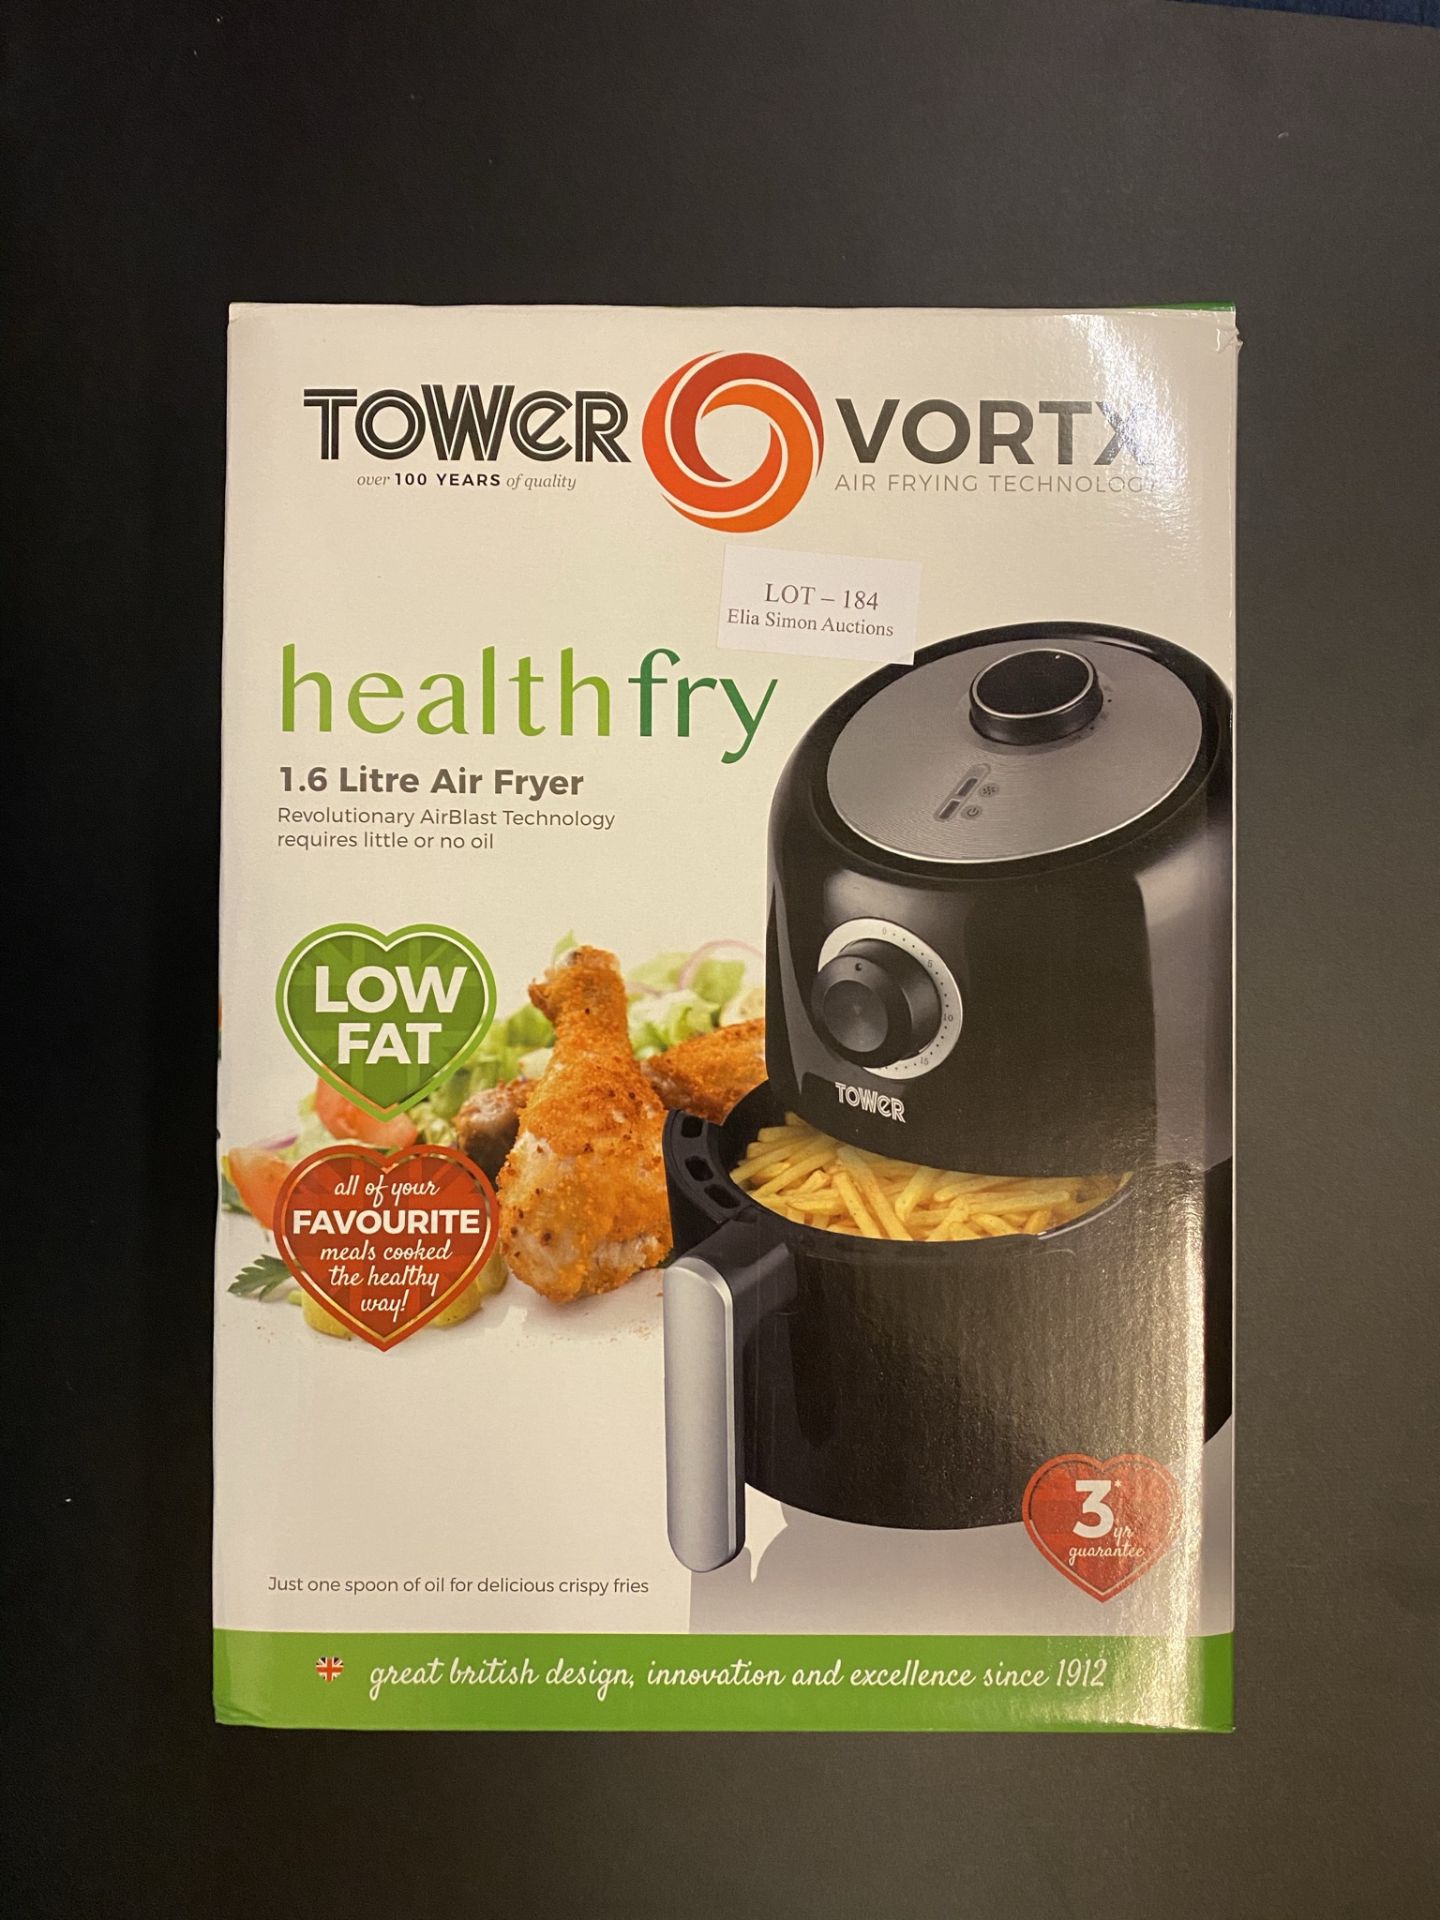 Tower T17026 Air Fryer with Rapid Air Circulation System - Image 2 of 2